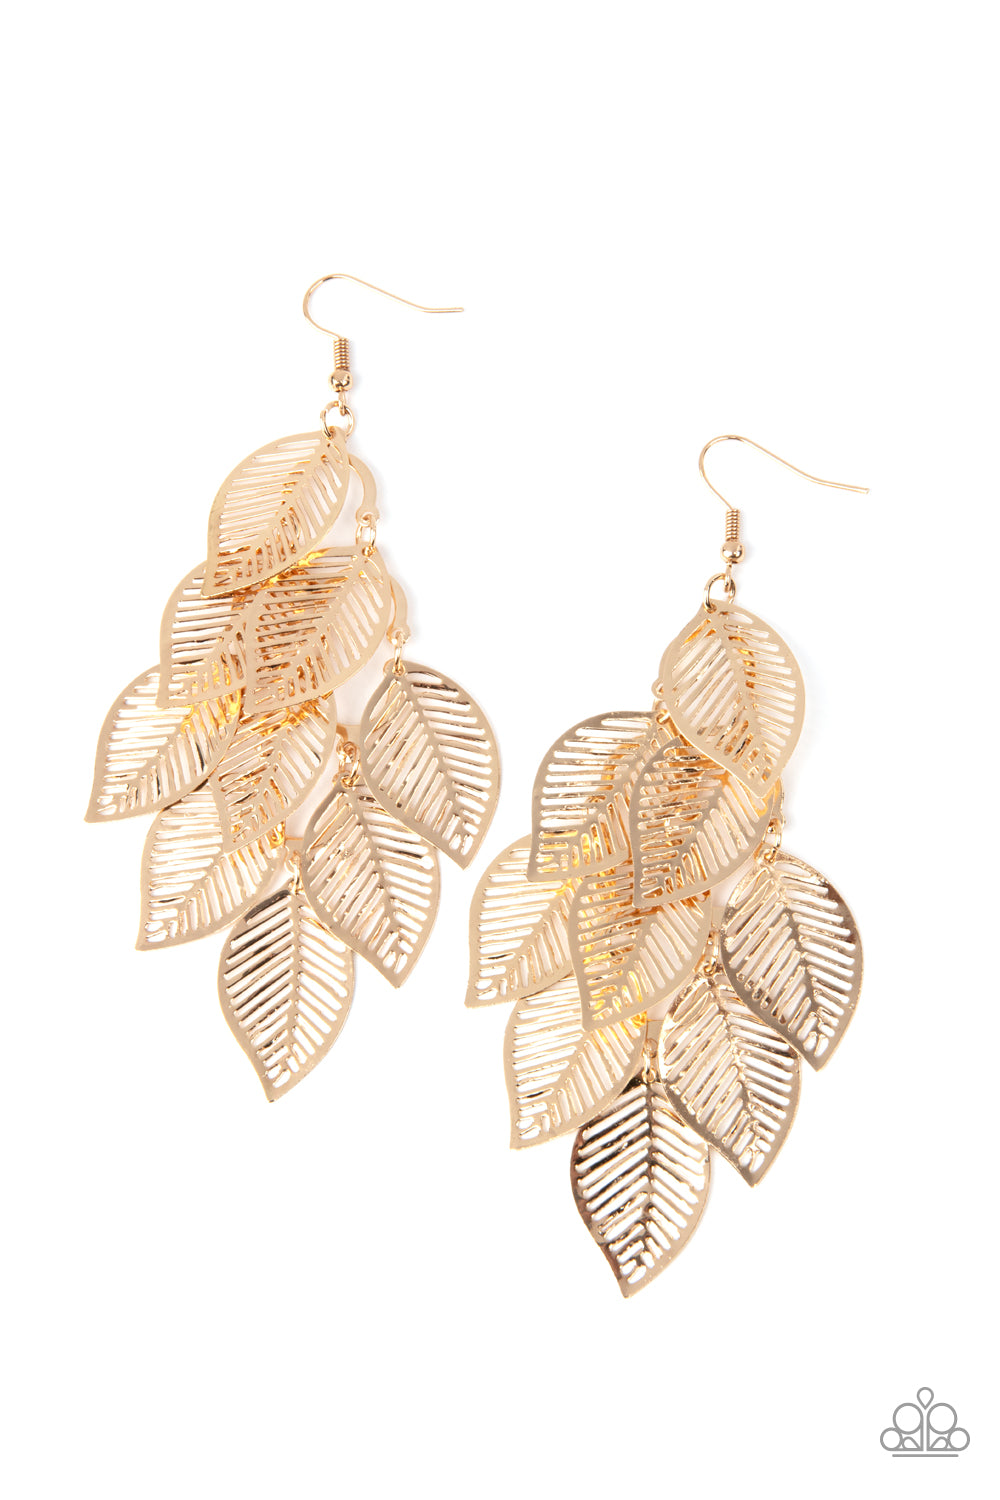 Limitlessly Leafy - Gold Earrings - Paparazzi Accessories